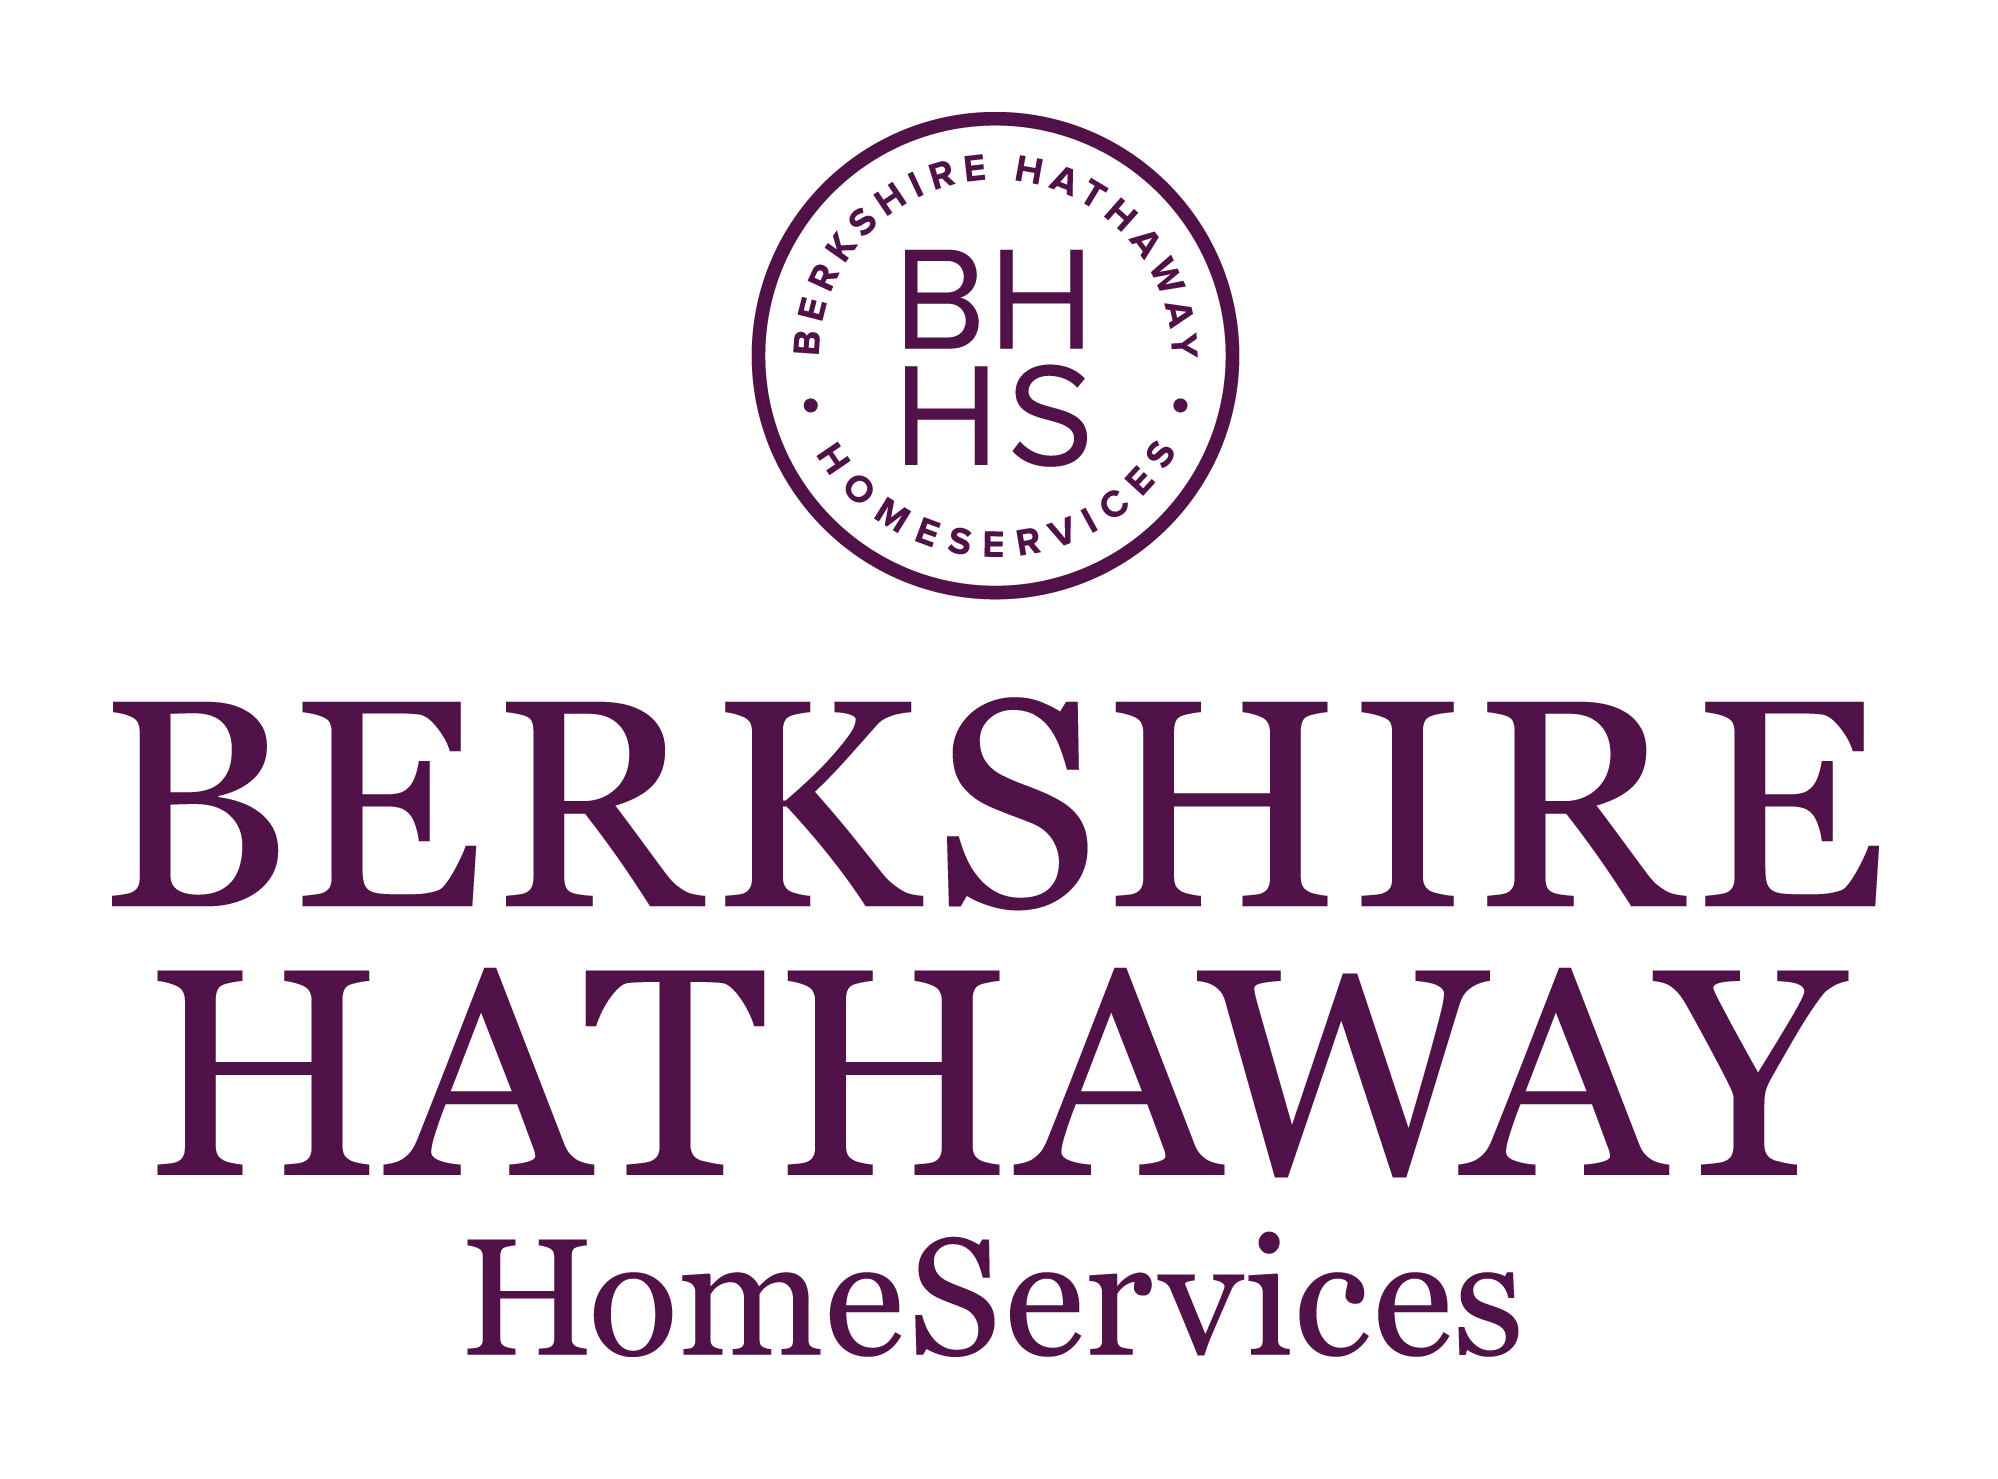 Logo Official Hathaway Berkshire Free Download Image PNG Image